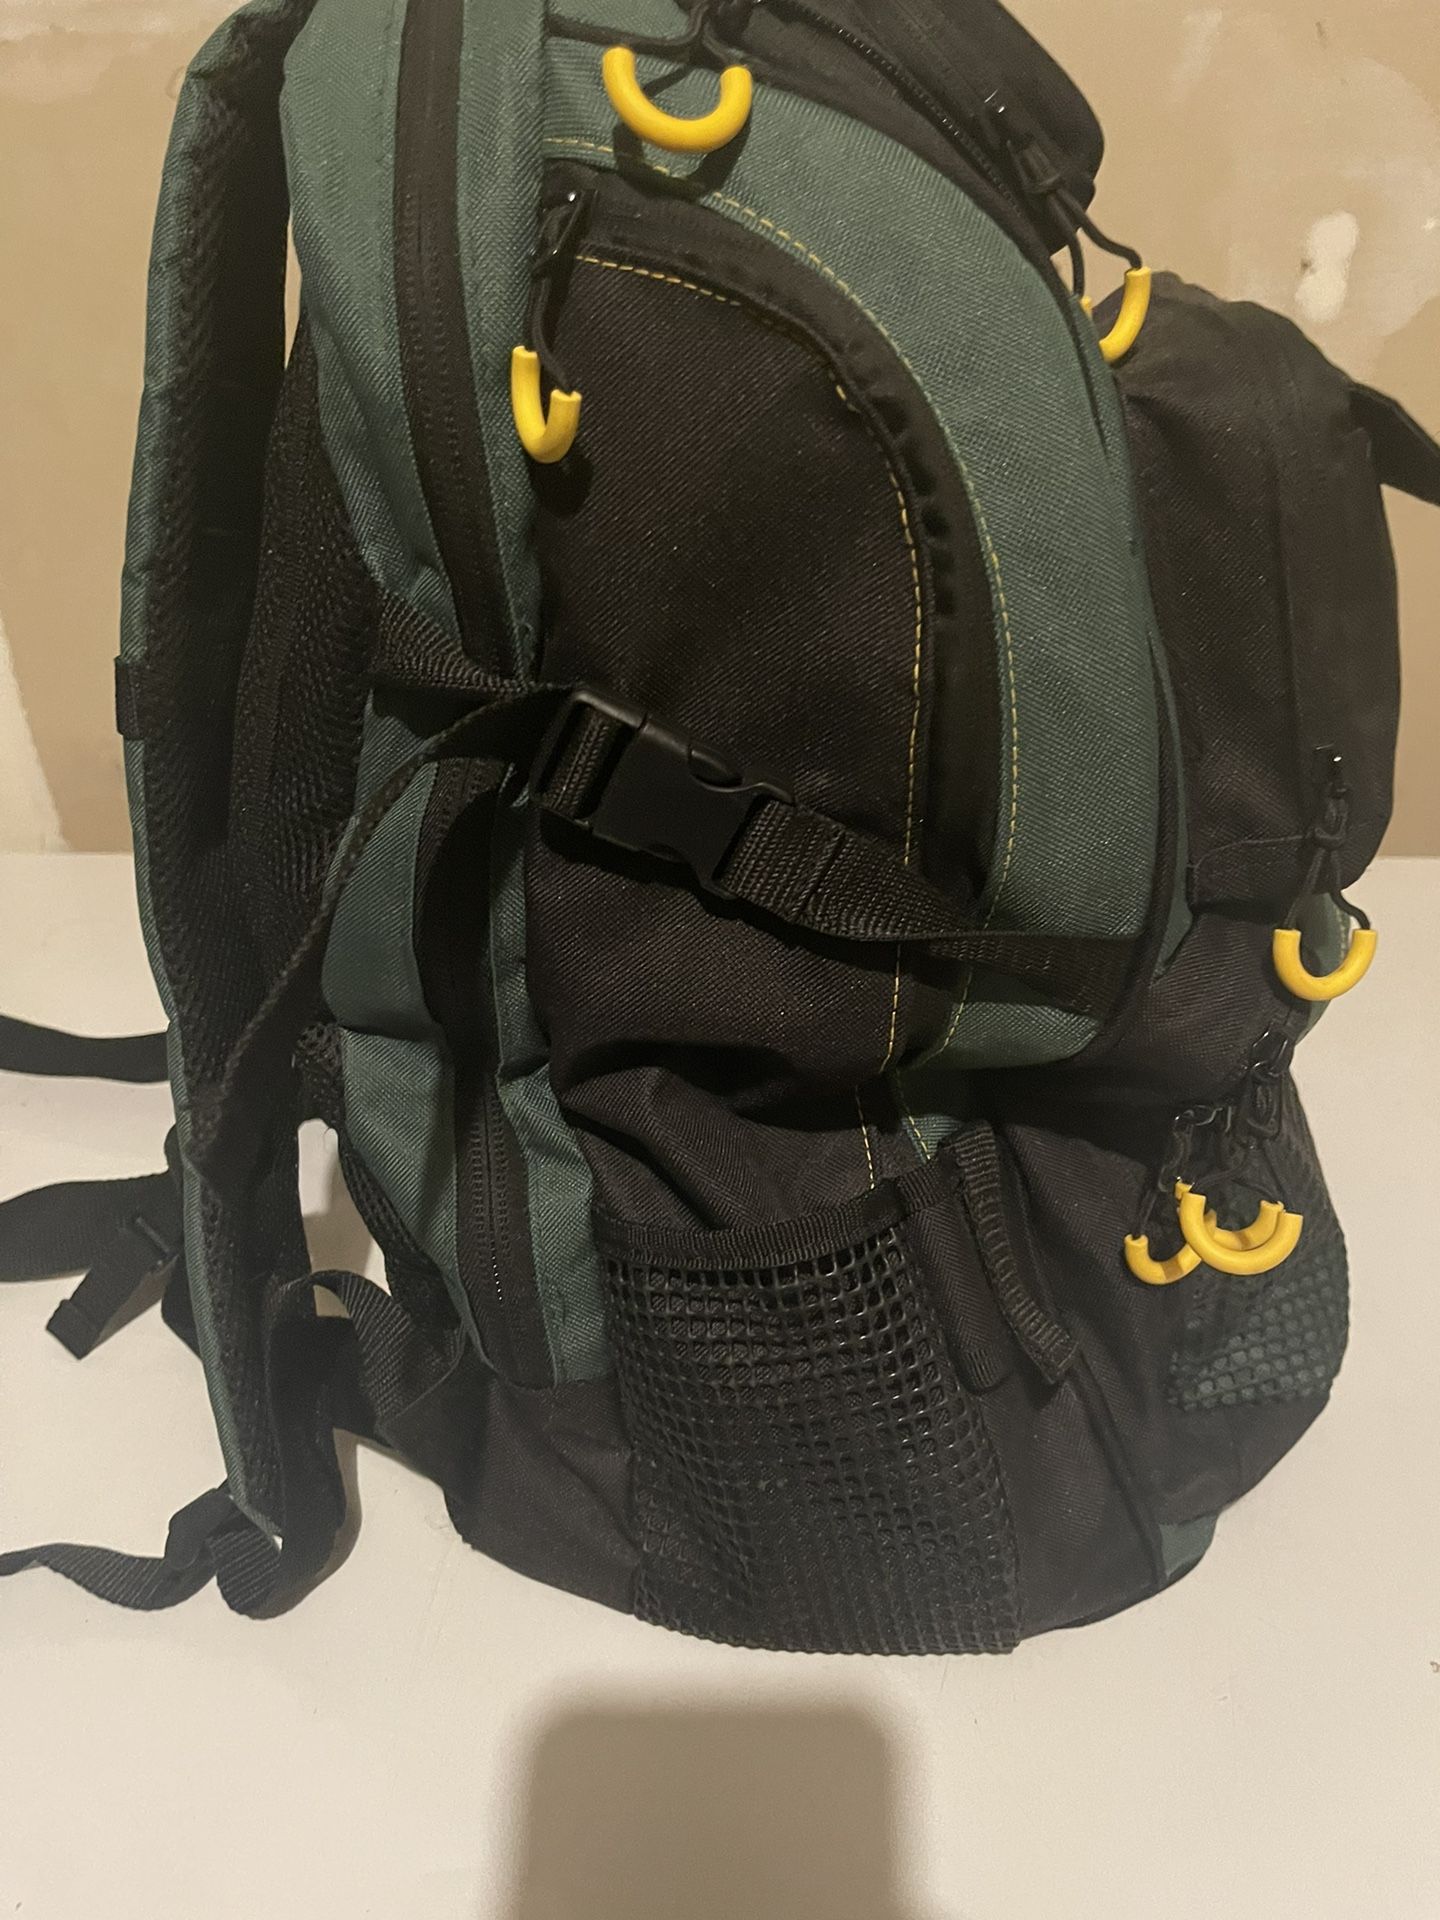 Bass pro Shop Tackle Backpack for Sale in Springfield, OR - OfferUp